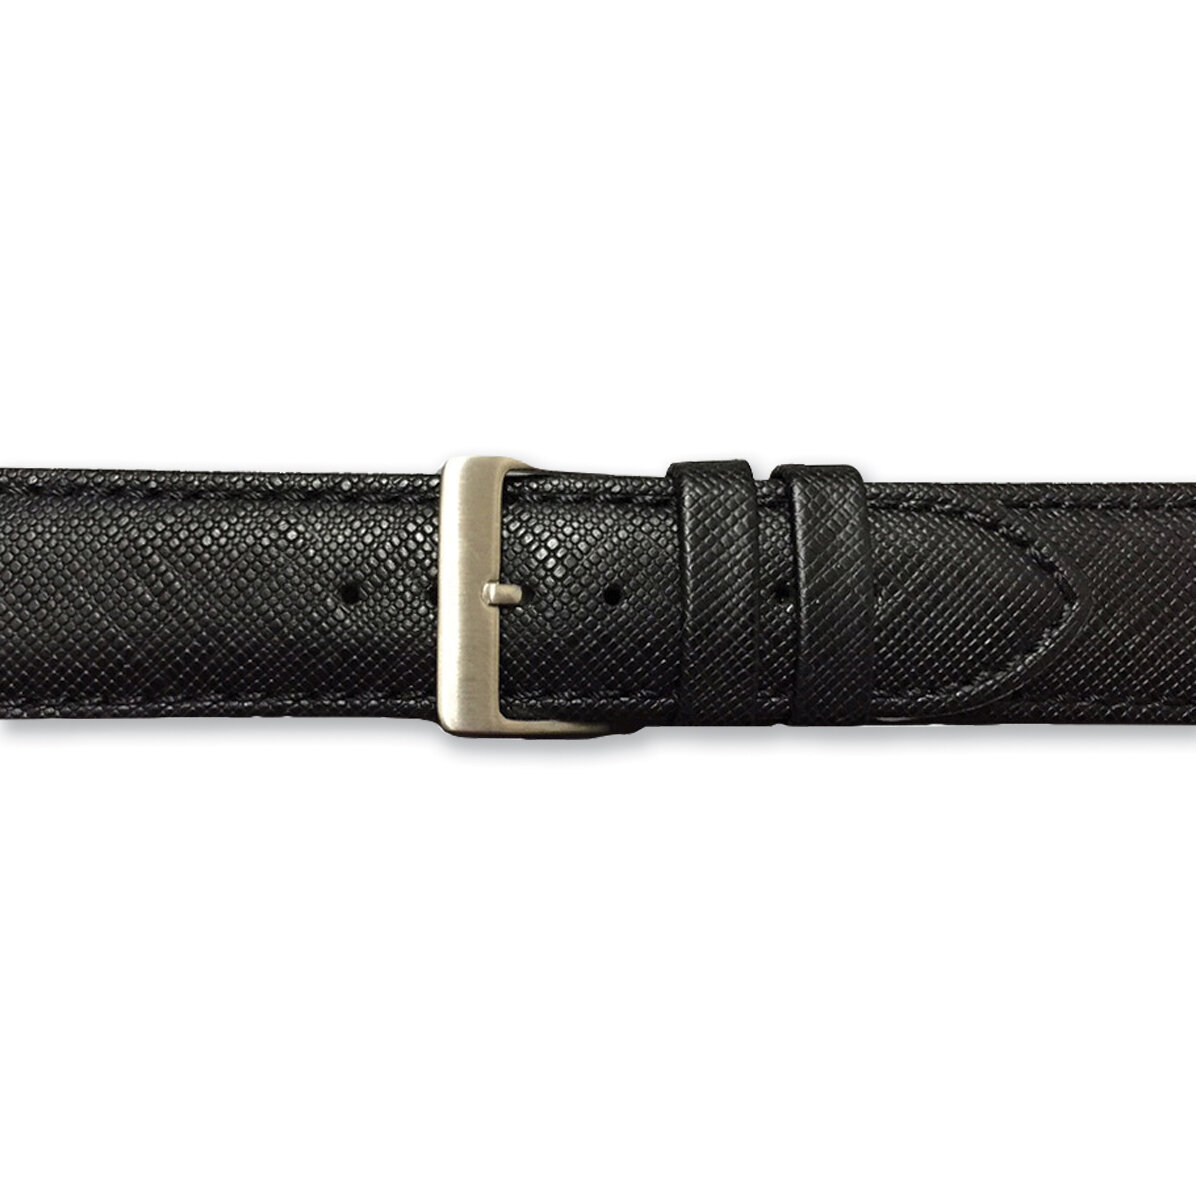 12mm Black Saffiano-style Leather Watch Band BA342-12